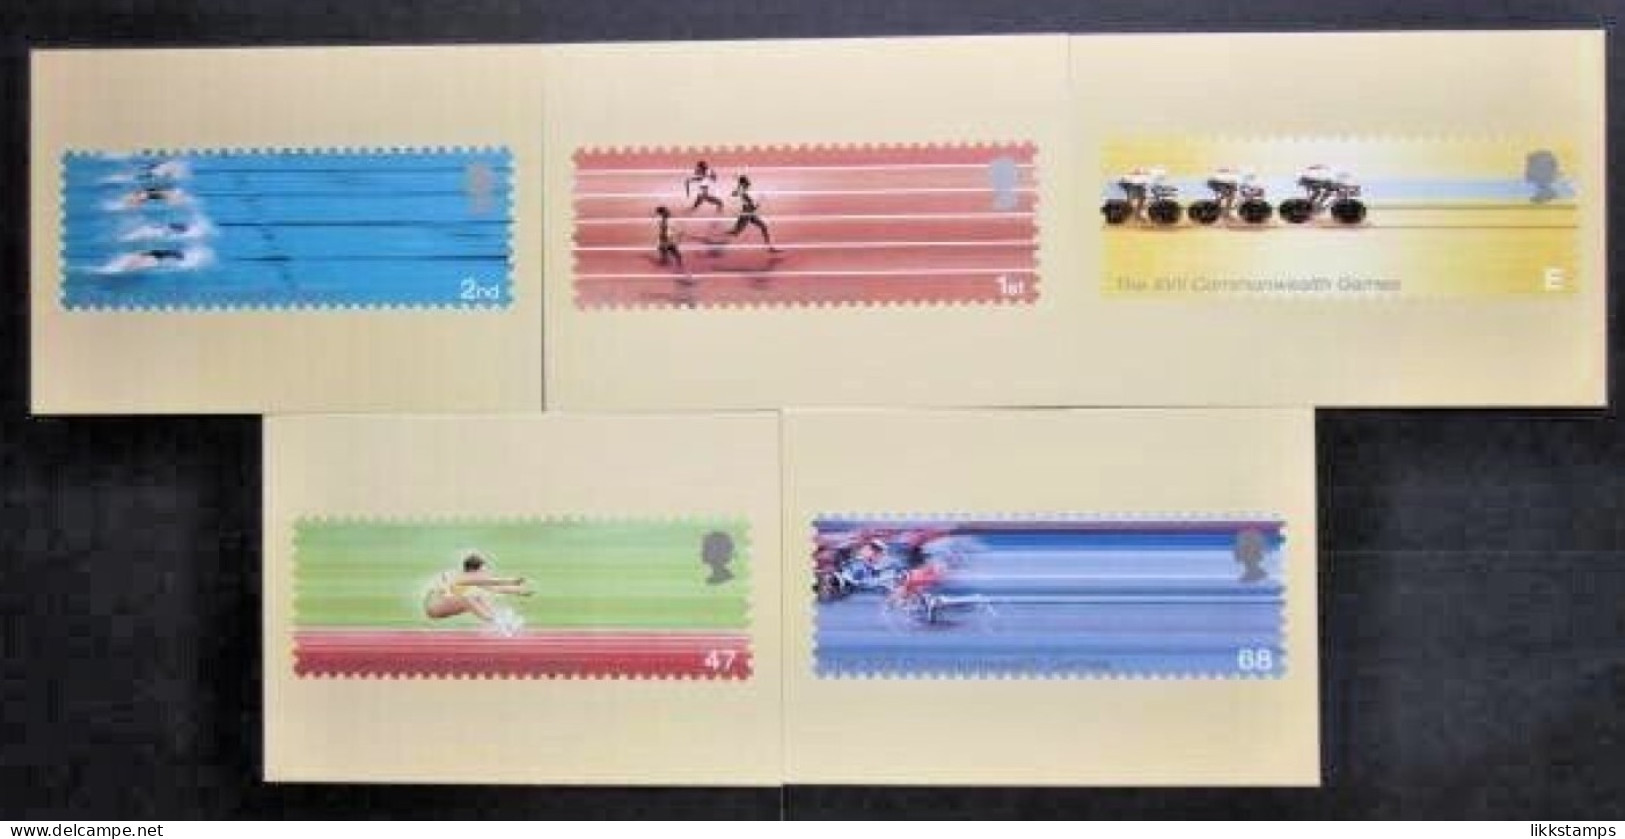 2002 THE 17th COMMONWEALTH GAMES P.H.Q. CARDS UNUSED, ISSUE No. 243 (A) #01700 - PHQ-Cards